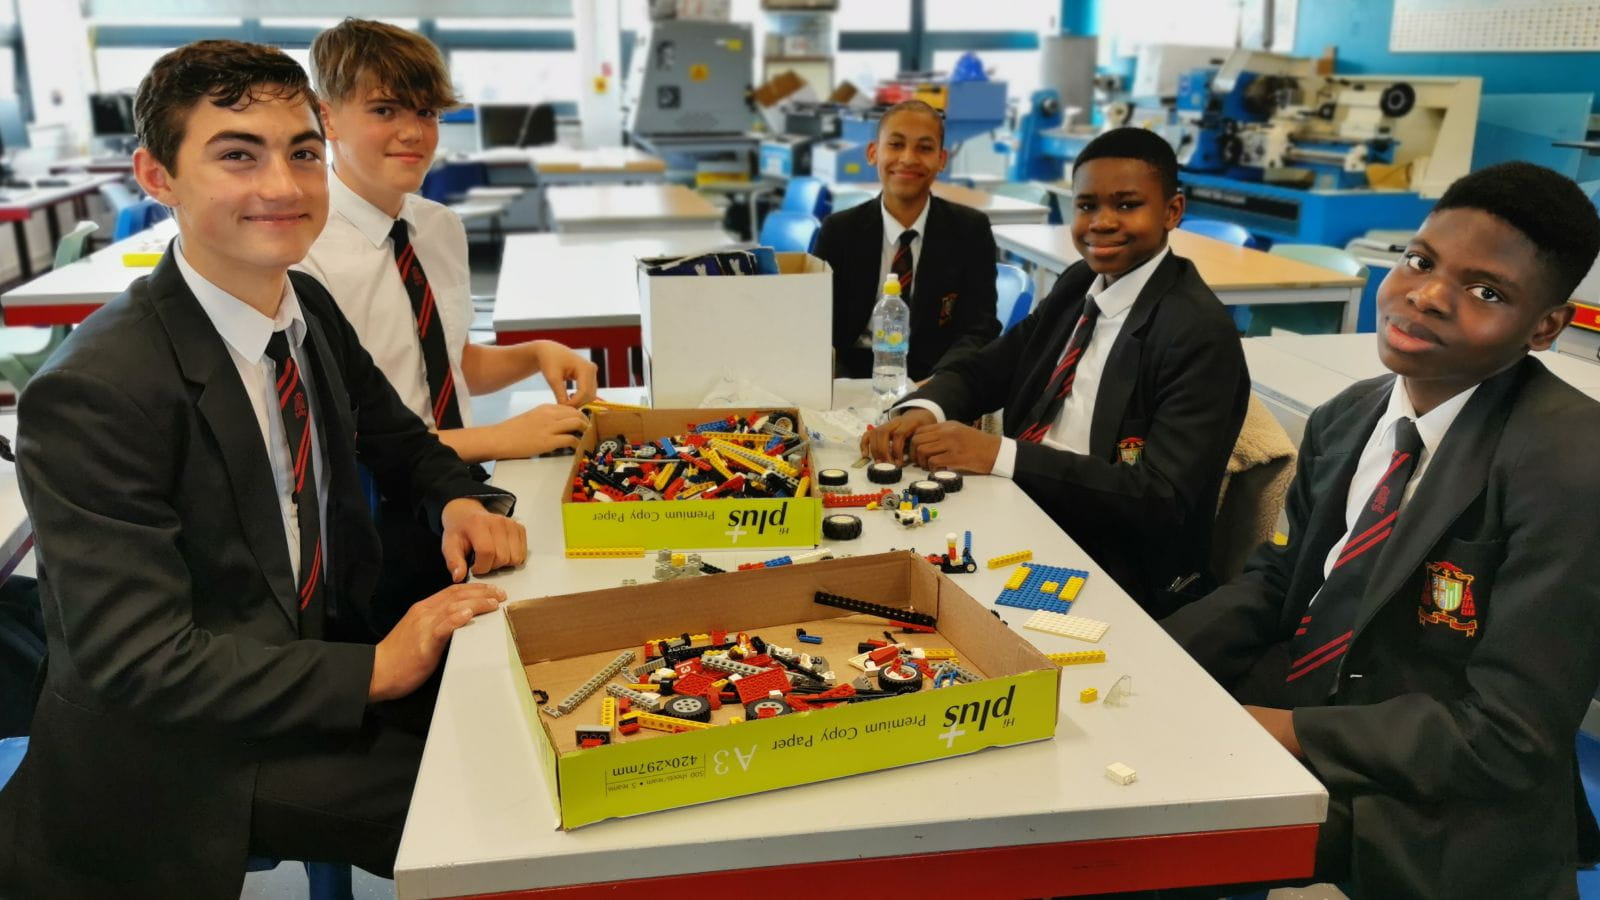 Students from Cardinal Langley RC High School have triumphed in Raytheon Technologies nationwide Quadcopter Challenge, which offers hundreds of pupils from around the country the chance to show off their engineering skills.